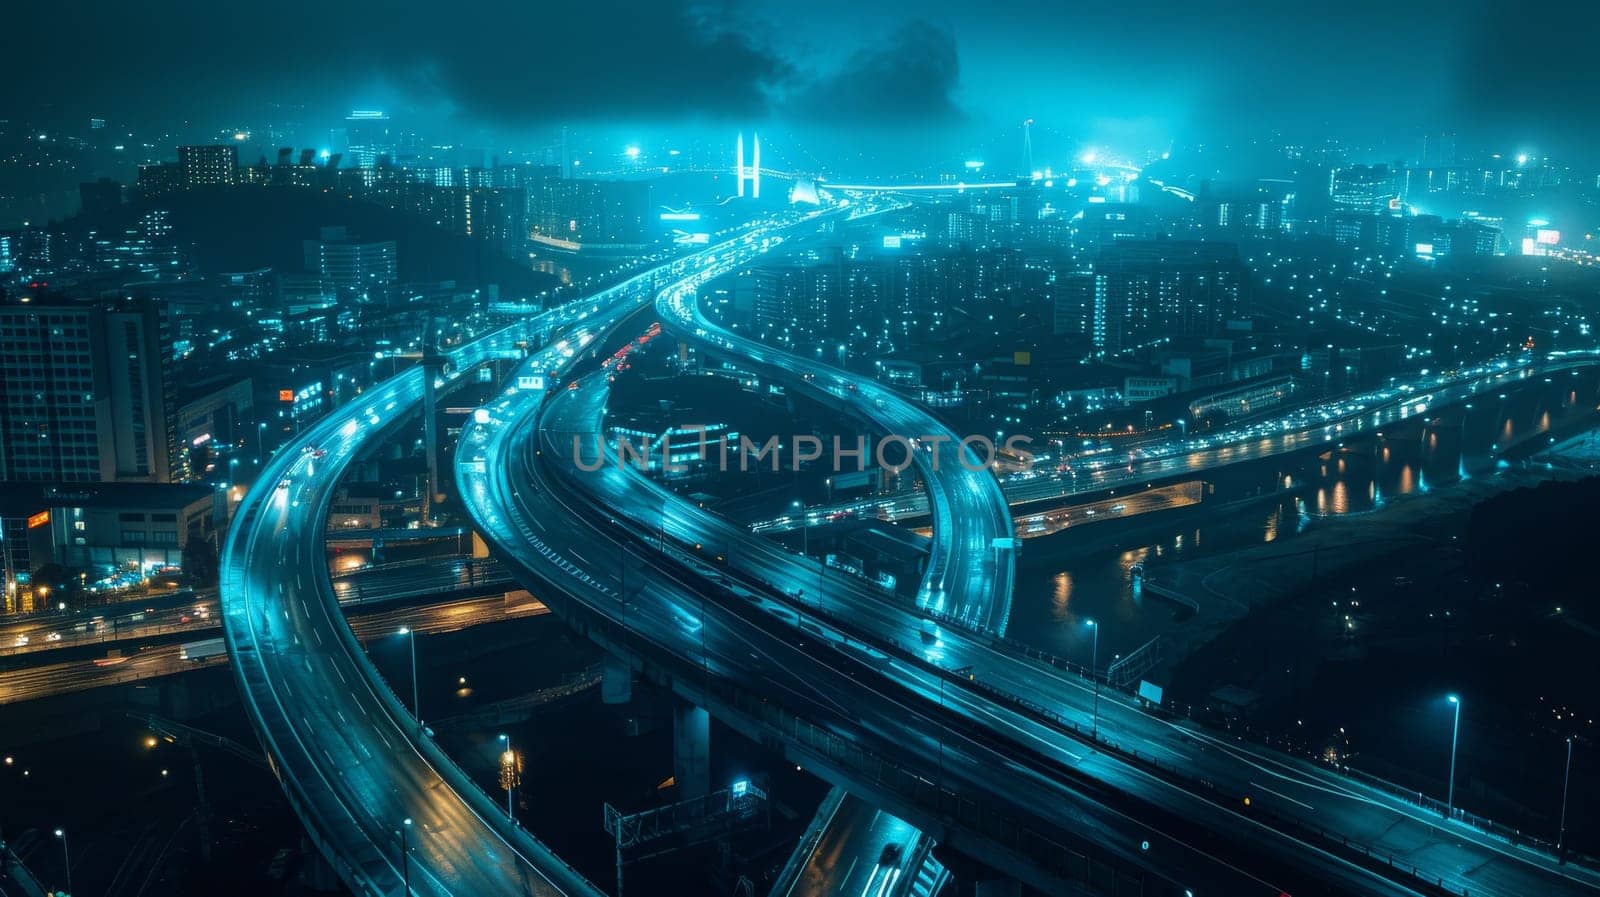 A city at night with a large round highway in the middle. The highway is lit up with blue lights